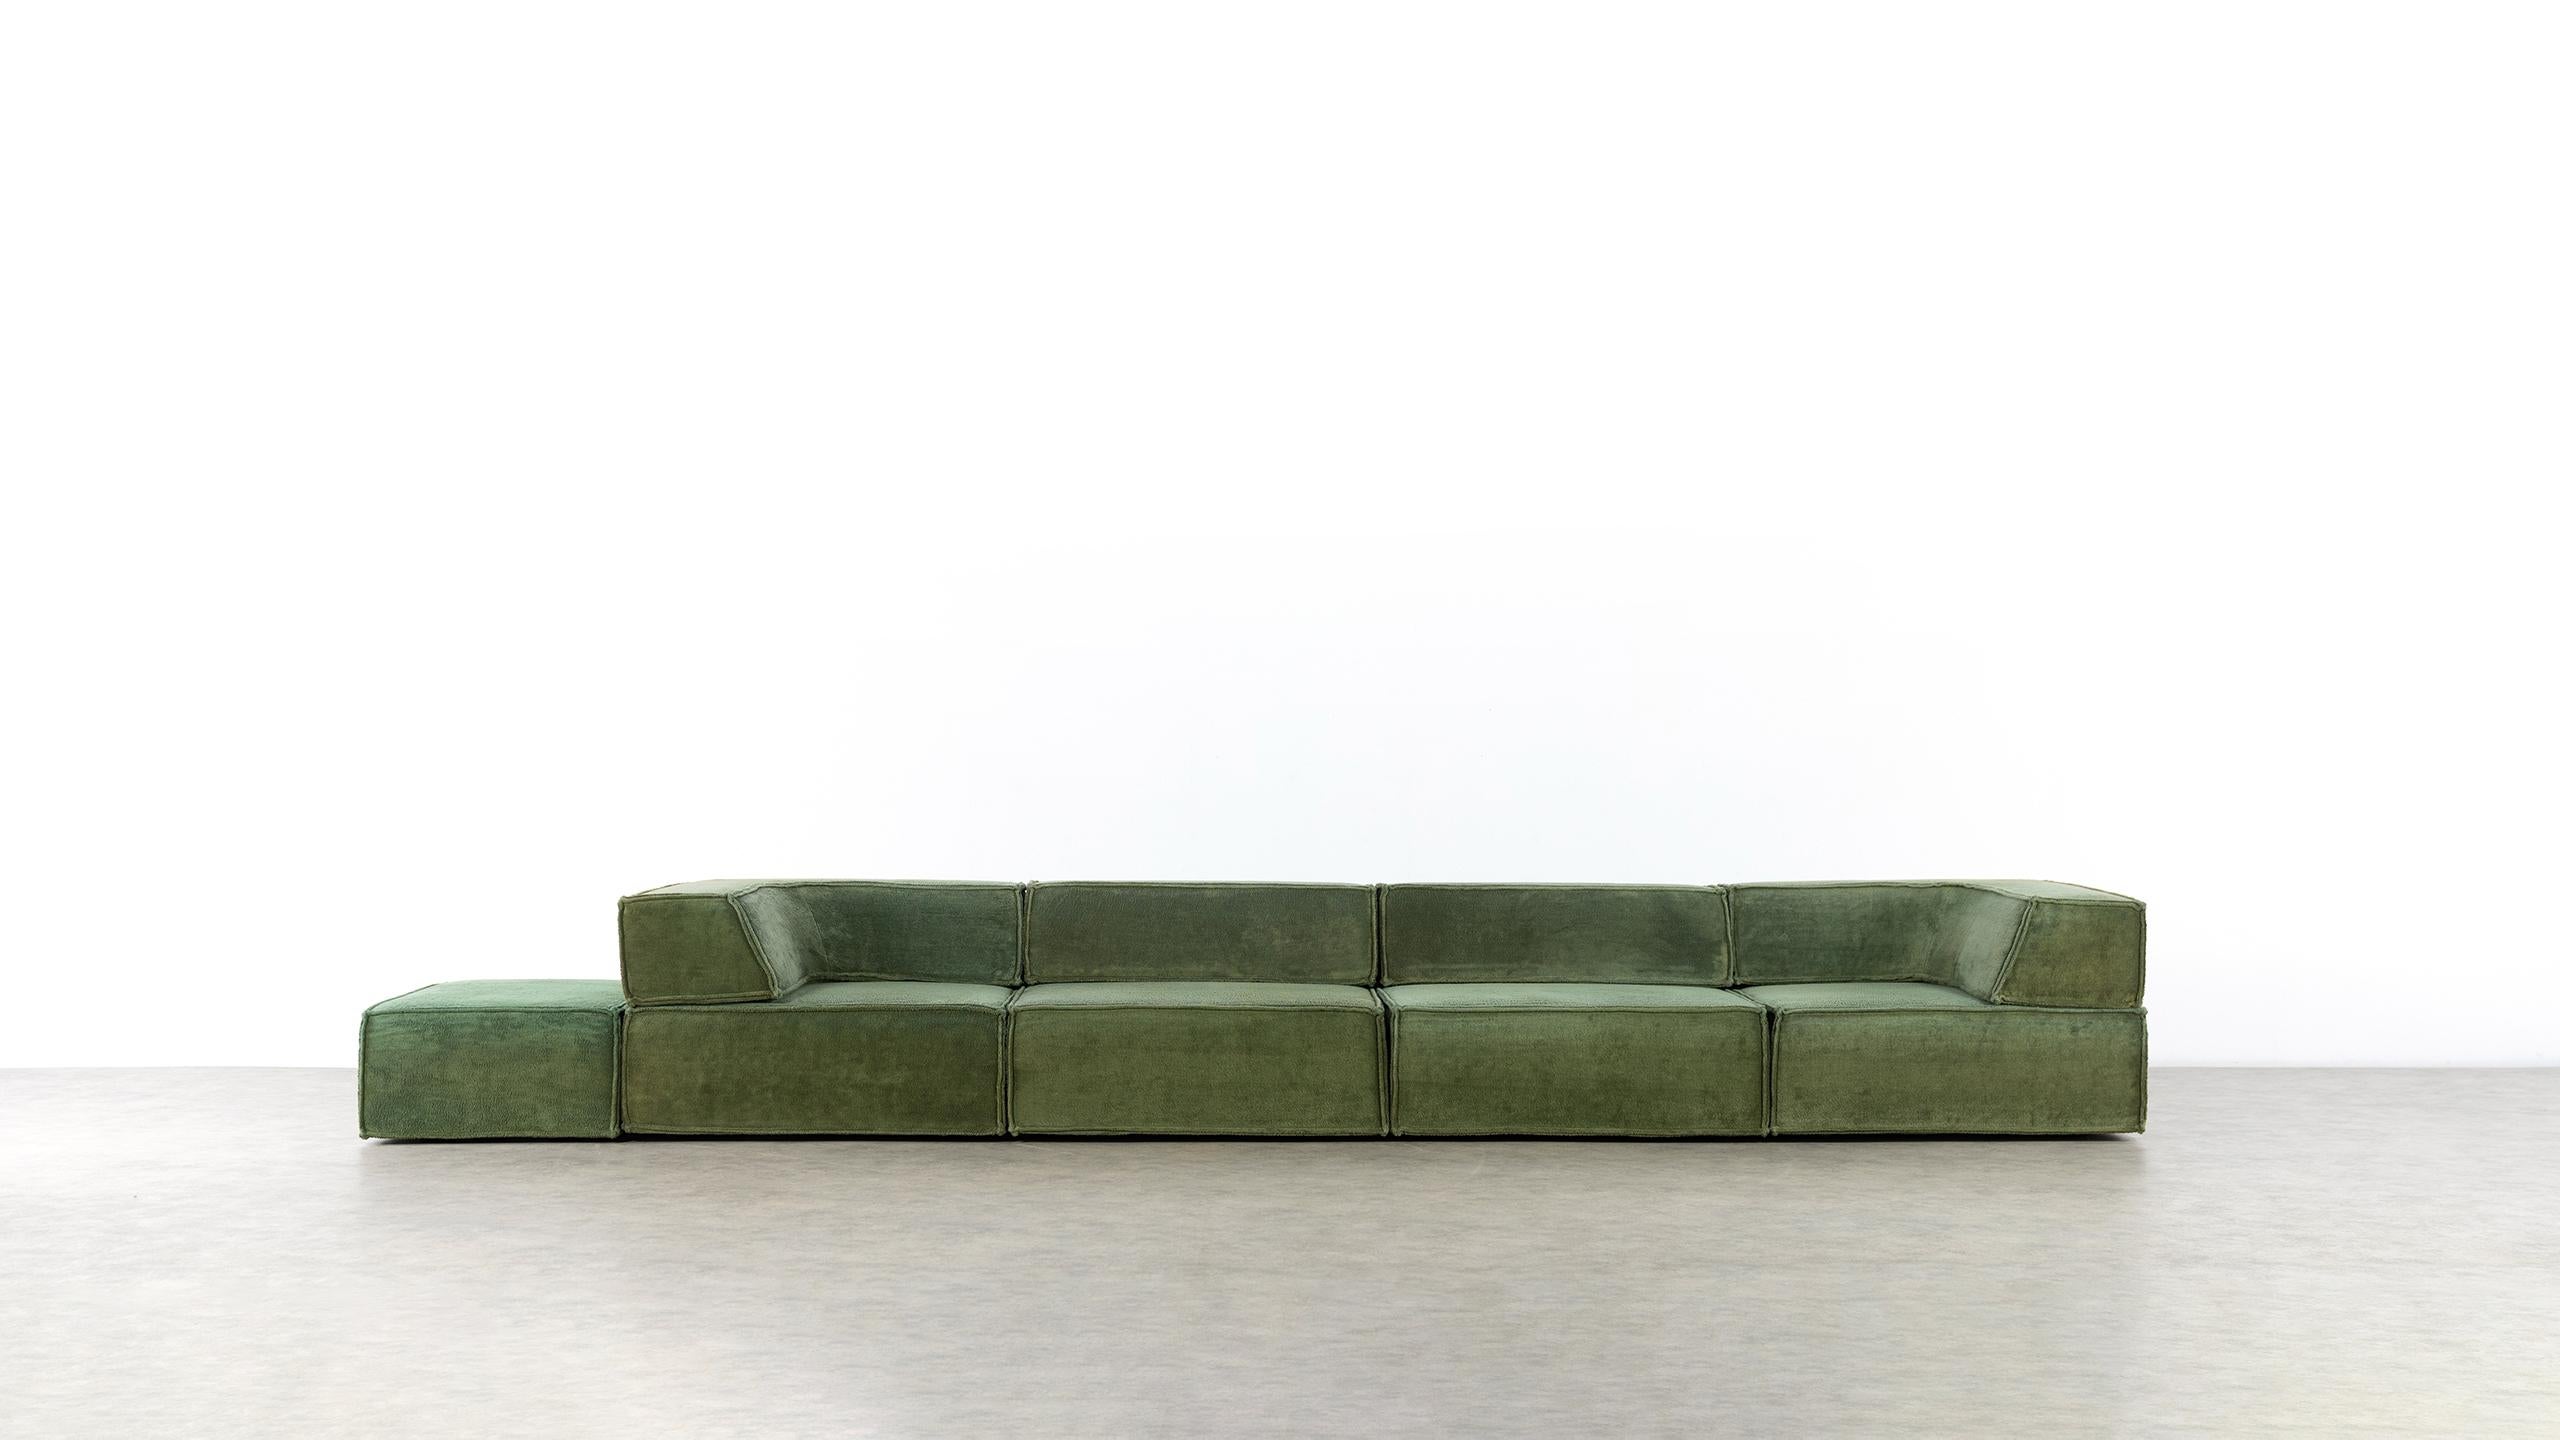 COR trio modular sofa, Giant Landscape in its original green color teddy-fabric, 
designed 1972 by Franz Hero and Karl Odermatt Team Form Ag, Switzerland.


The modular sofa system, designed by Team Form AG in Switzerland for COR in 1972, 
fits